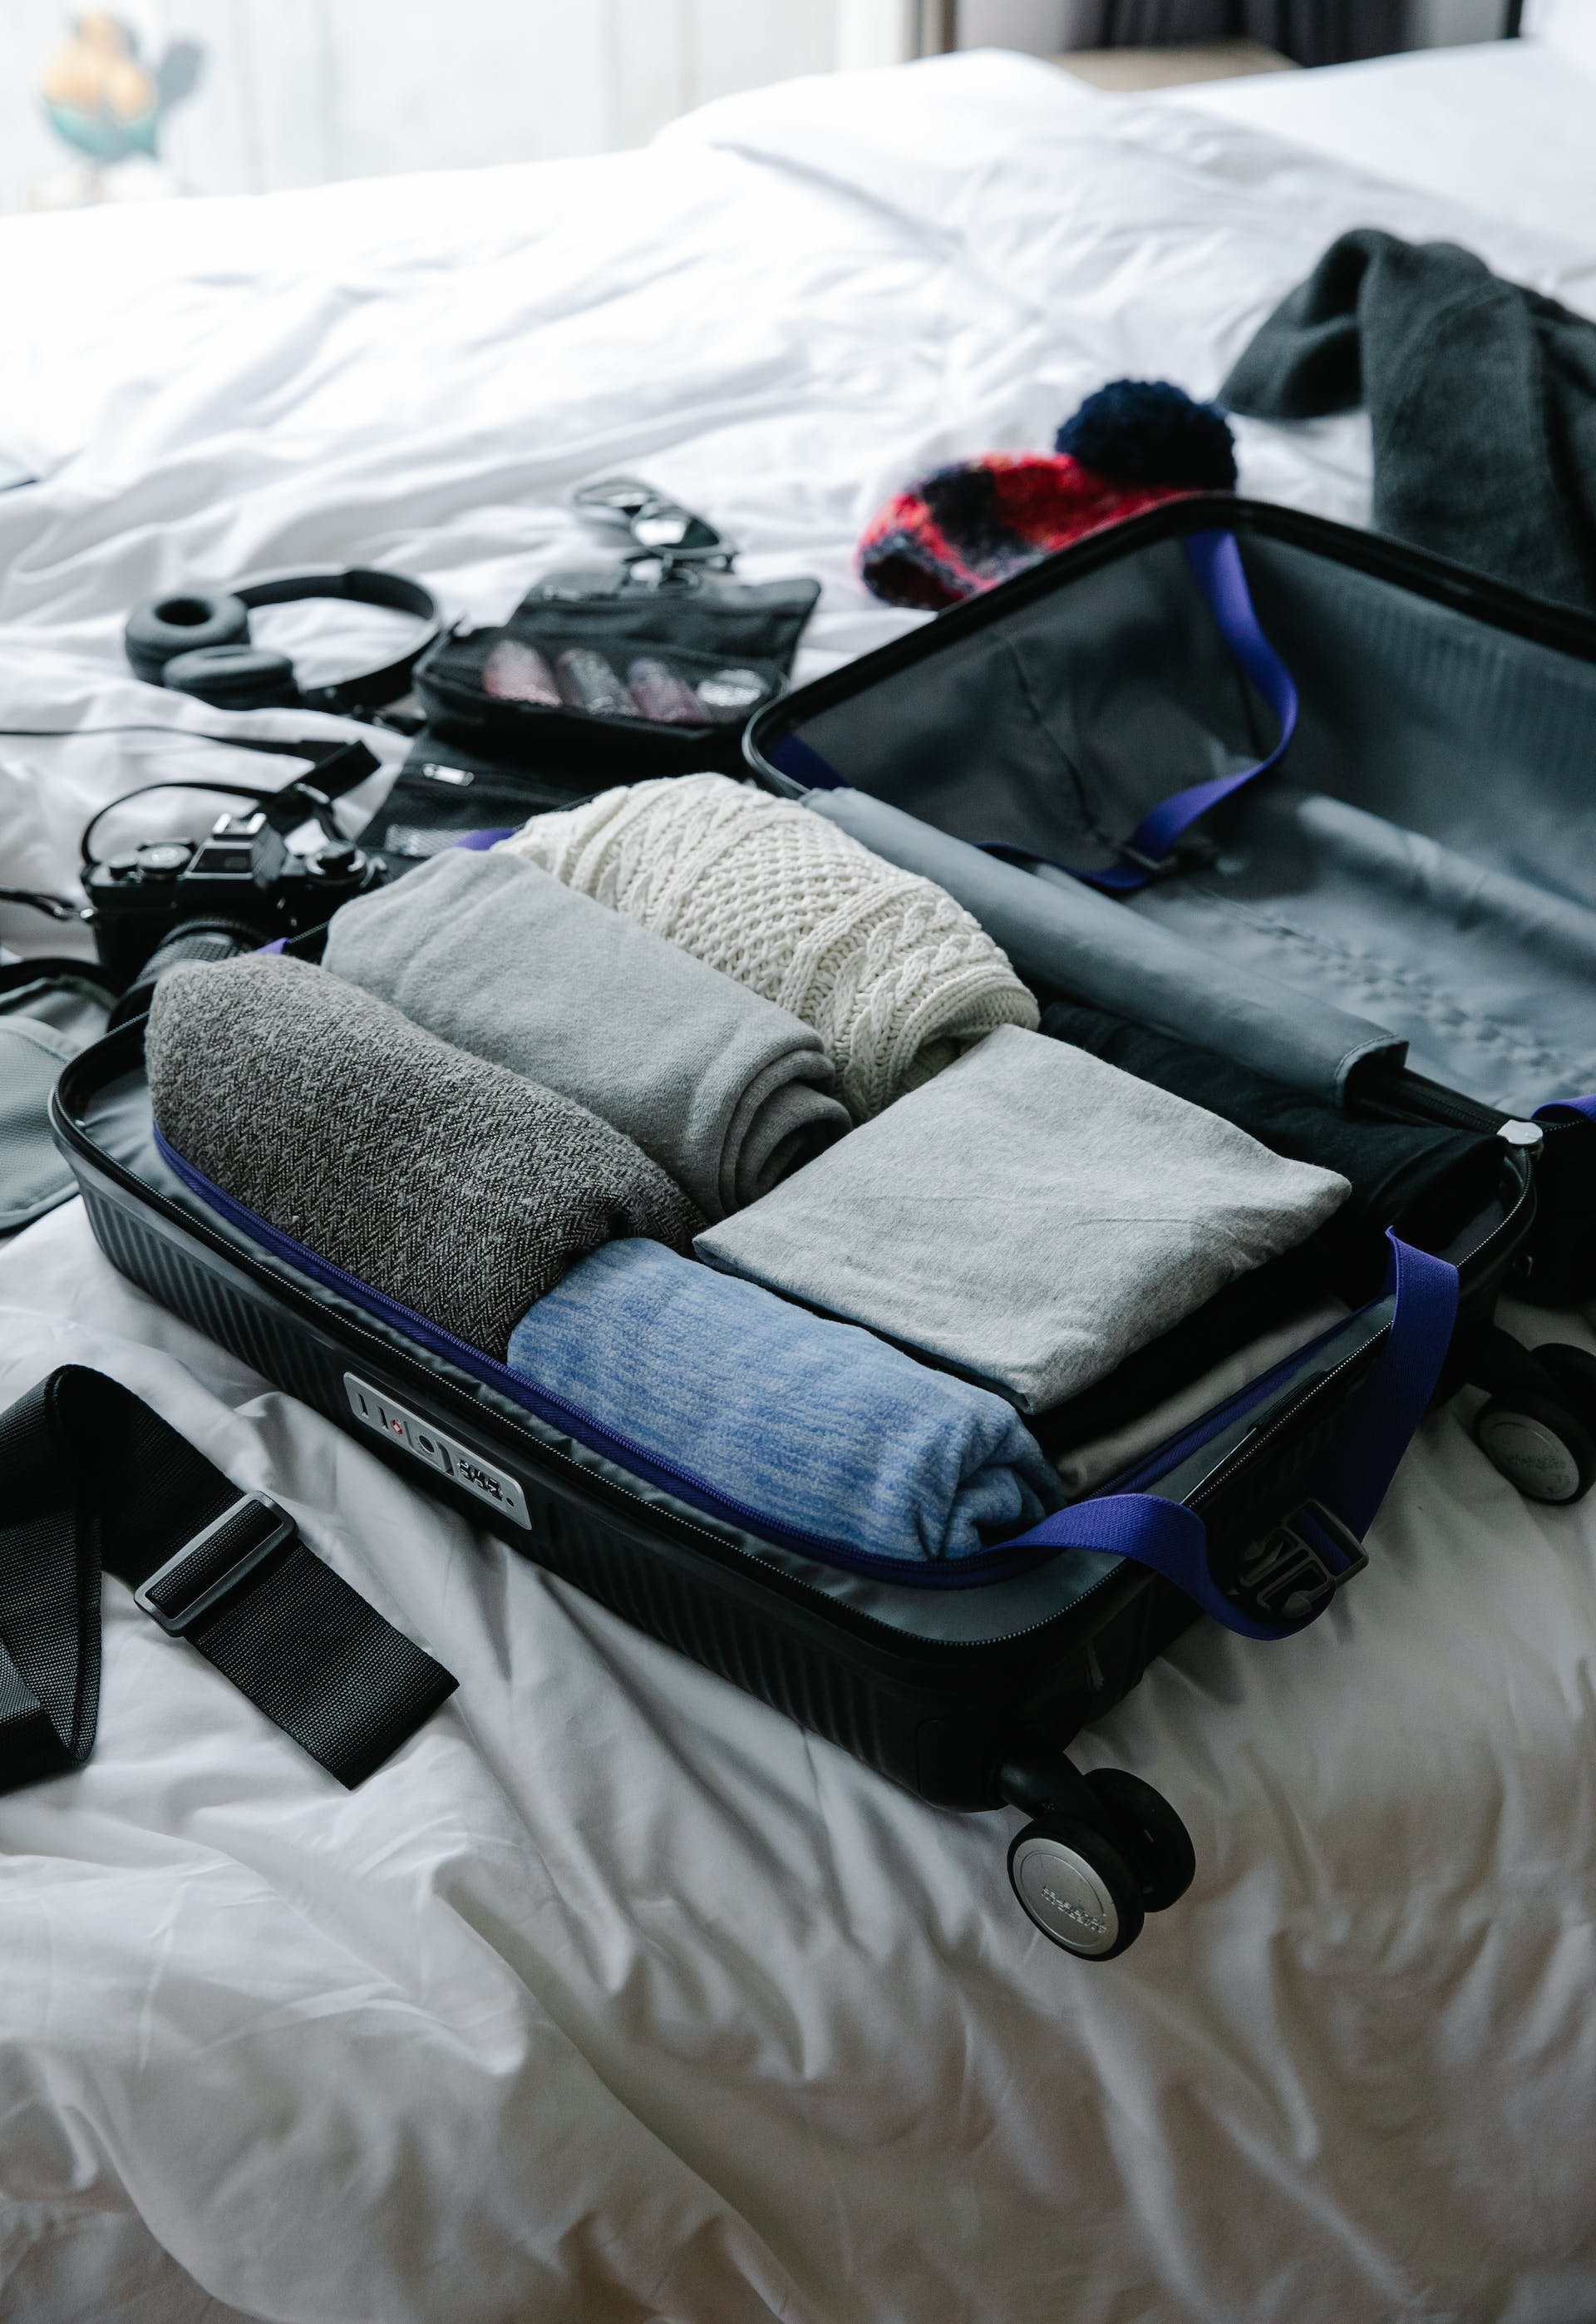 Open suitcase on bed | Source: Pexels